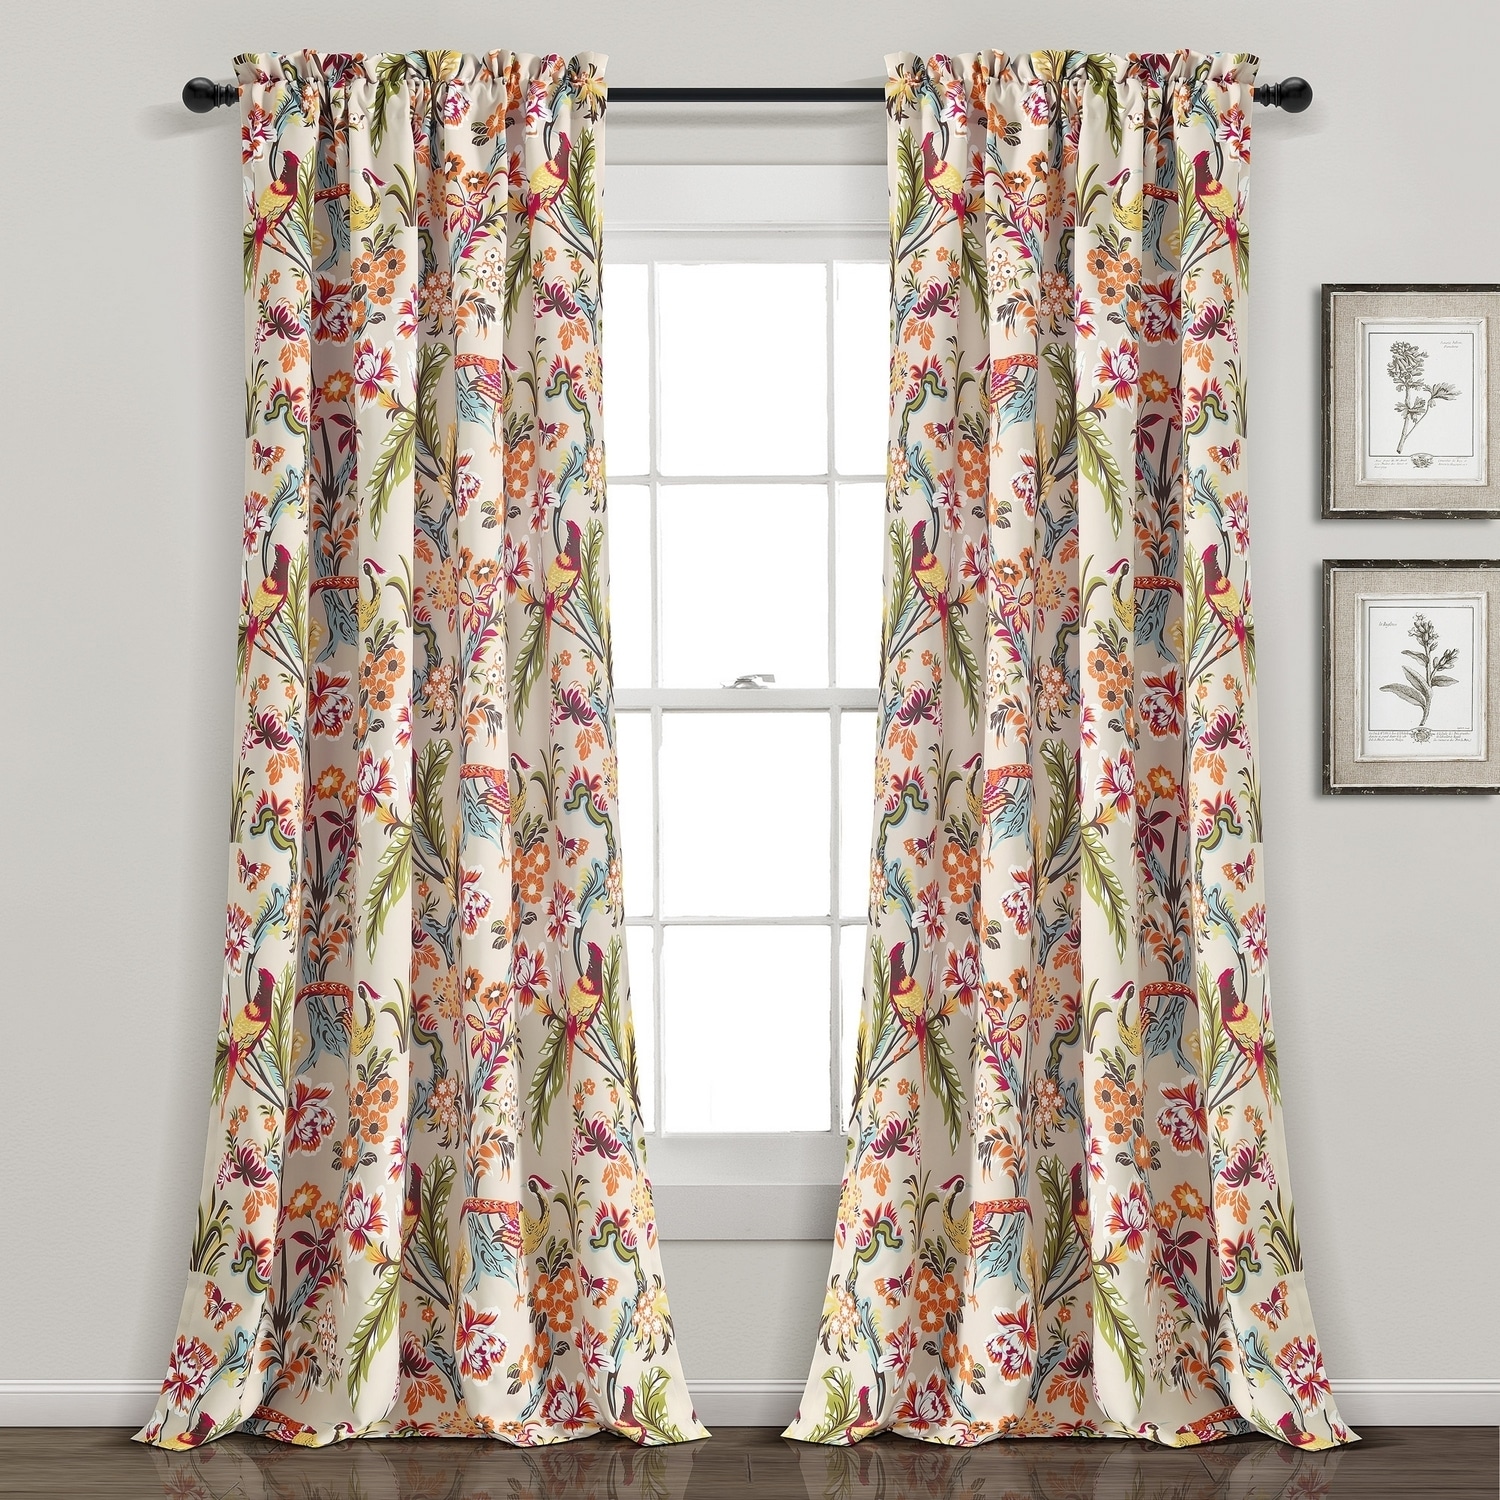 Drapes Decor Light & Curtain Neutral Panel Lush Filtering Pair department the 84-in Pocket in Curtains at Rod